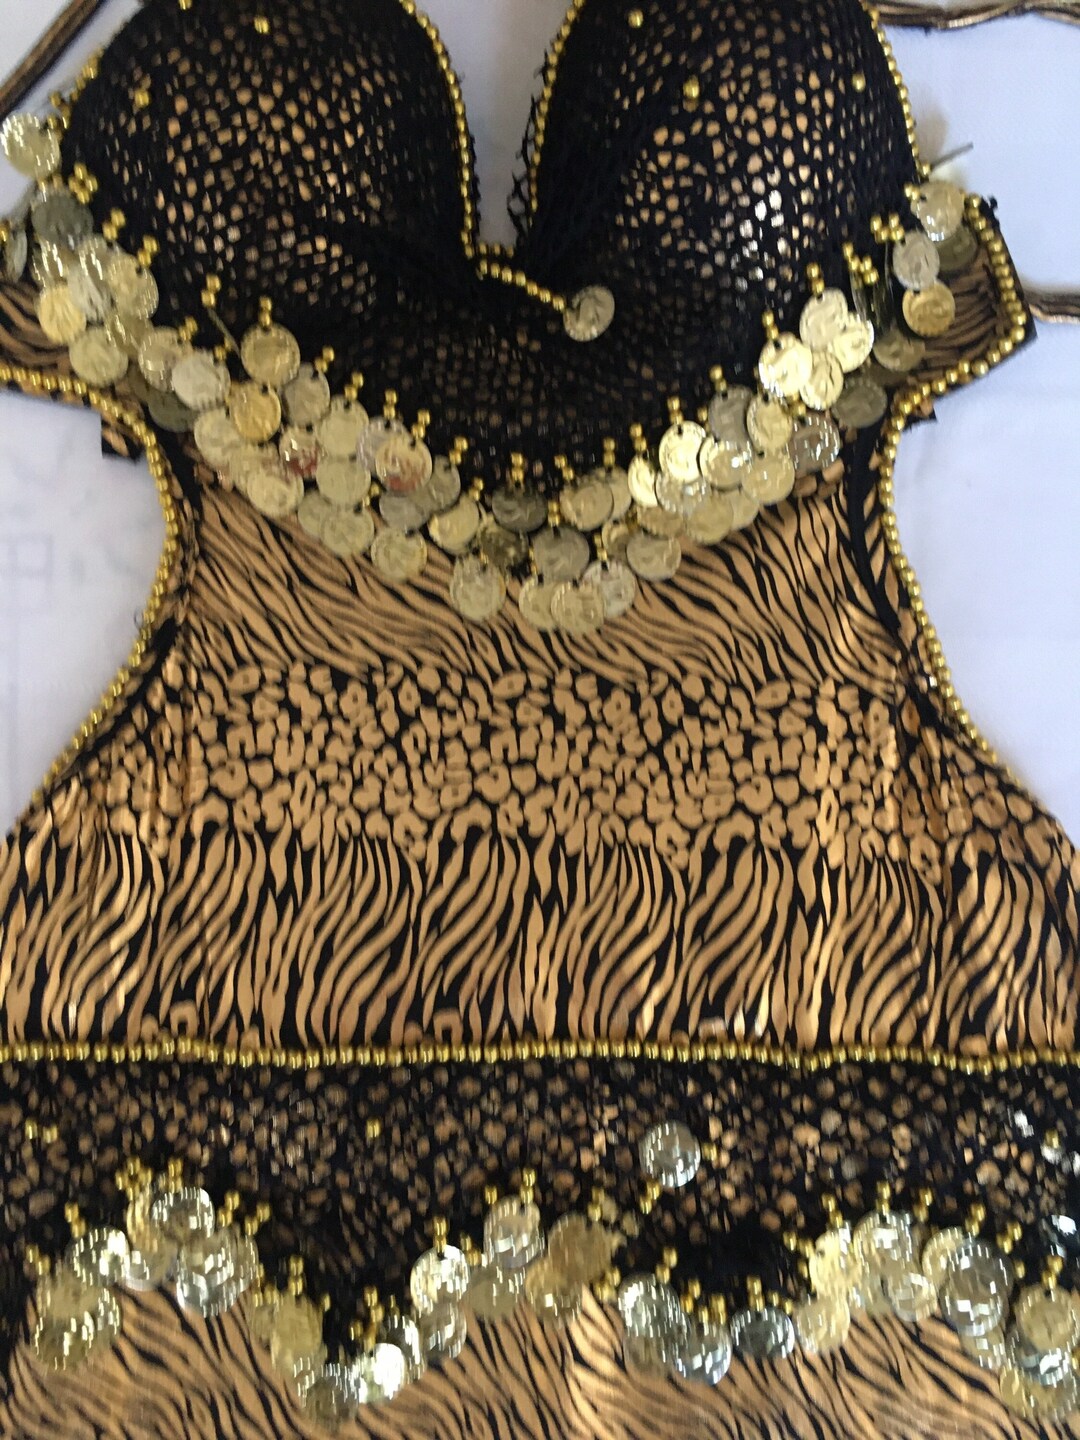 Egyptian Sexy Belly Dance Costume, Handmade Embroidered Belly Dance ...